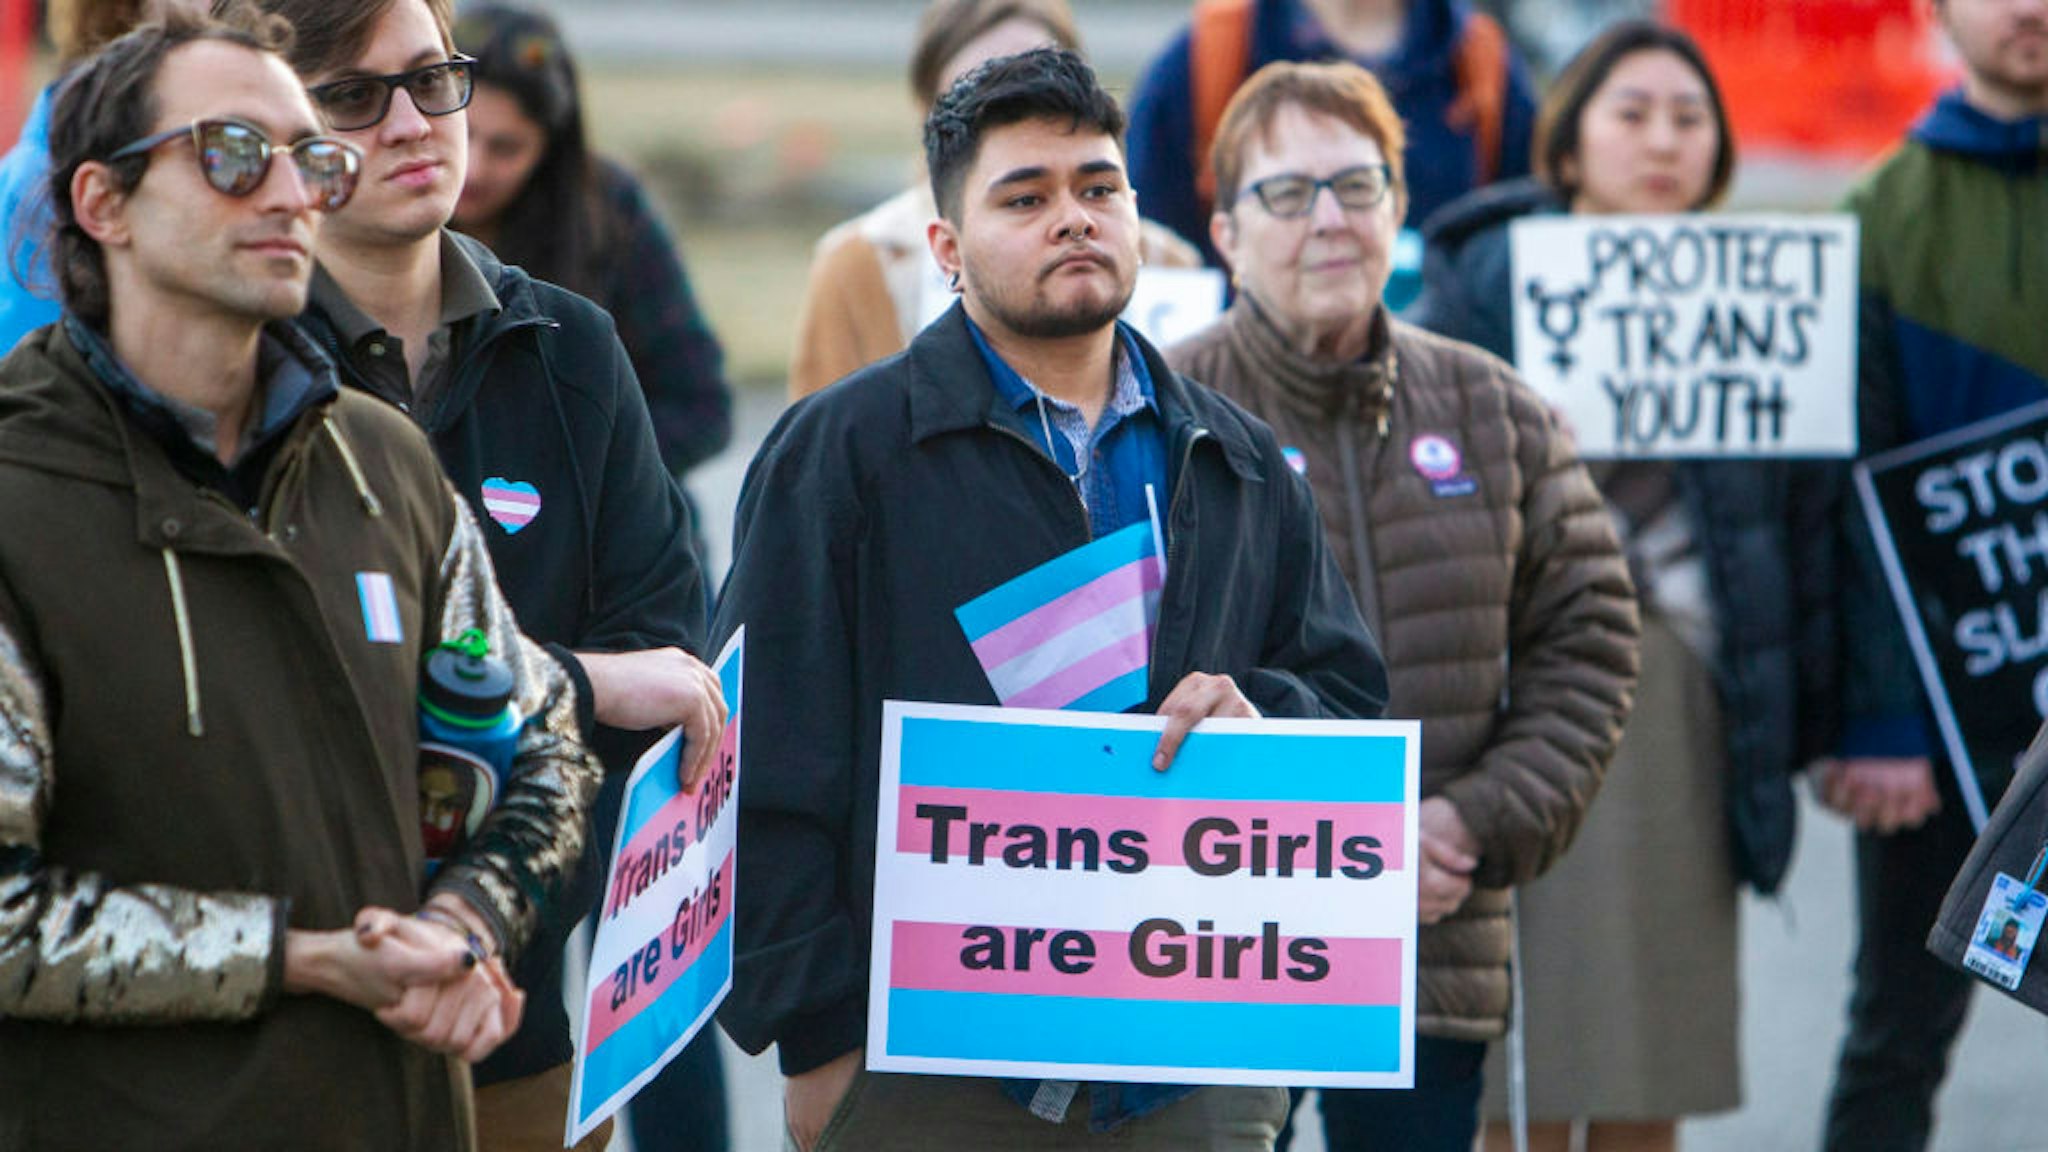 More than 100 people rallied at the Capitol in Boise, Idaho, in support of transgender students and athletes, March 4, 2020.